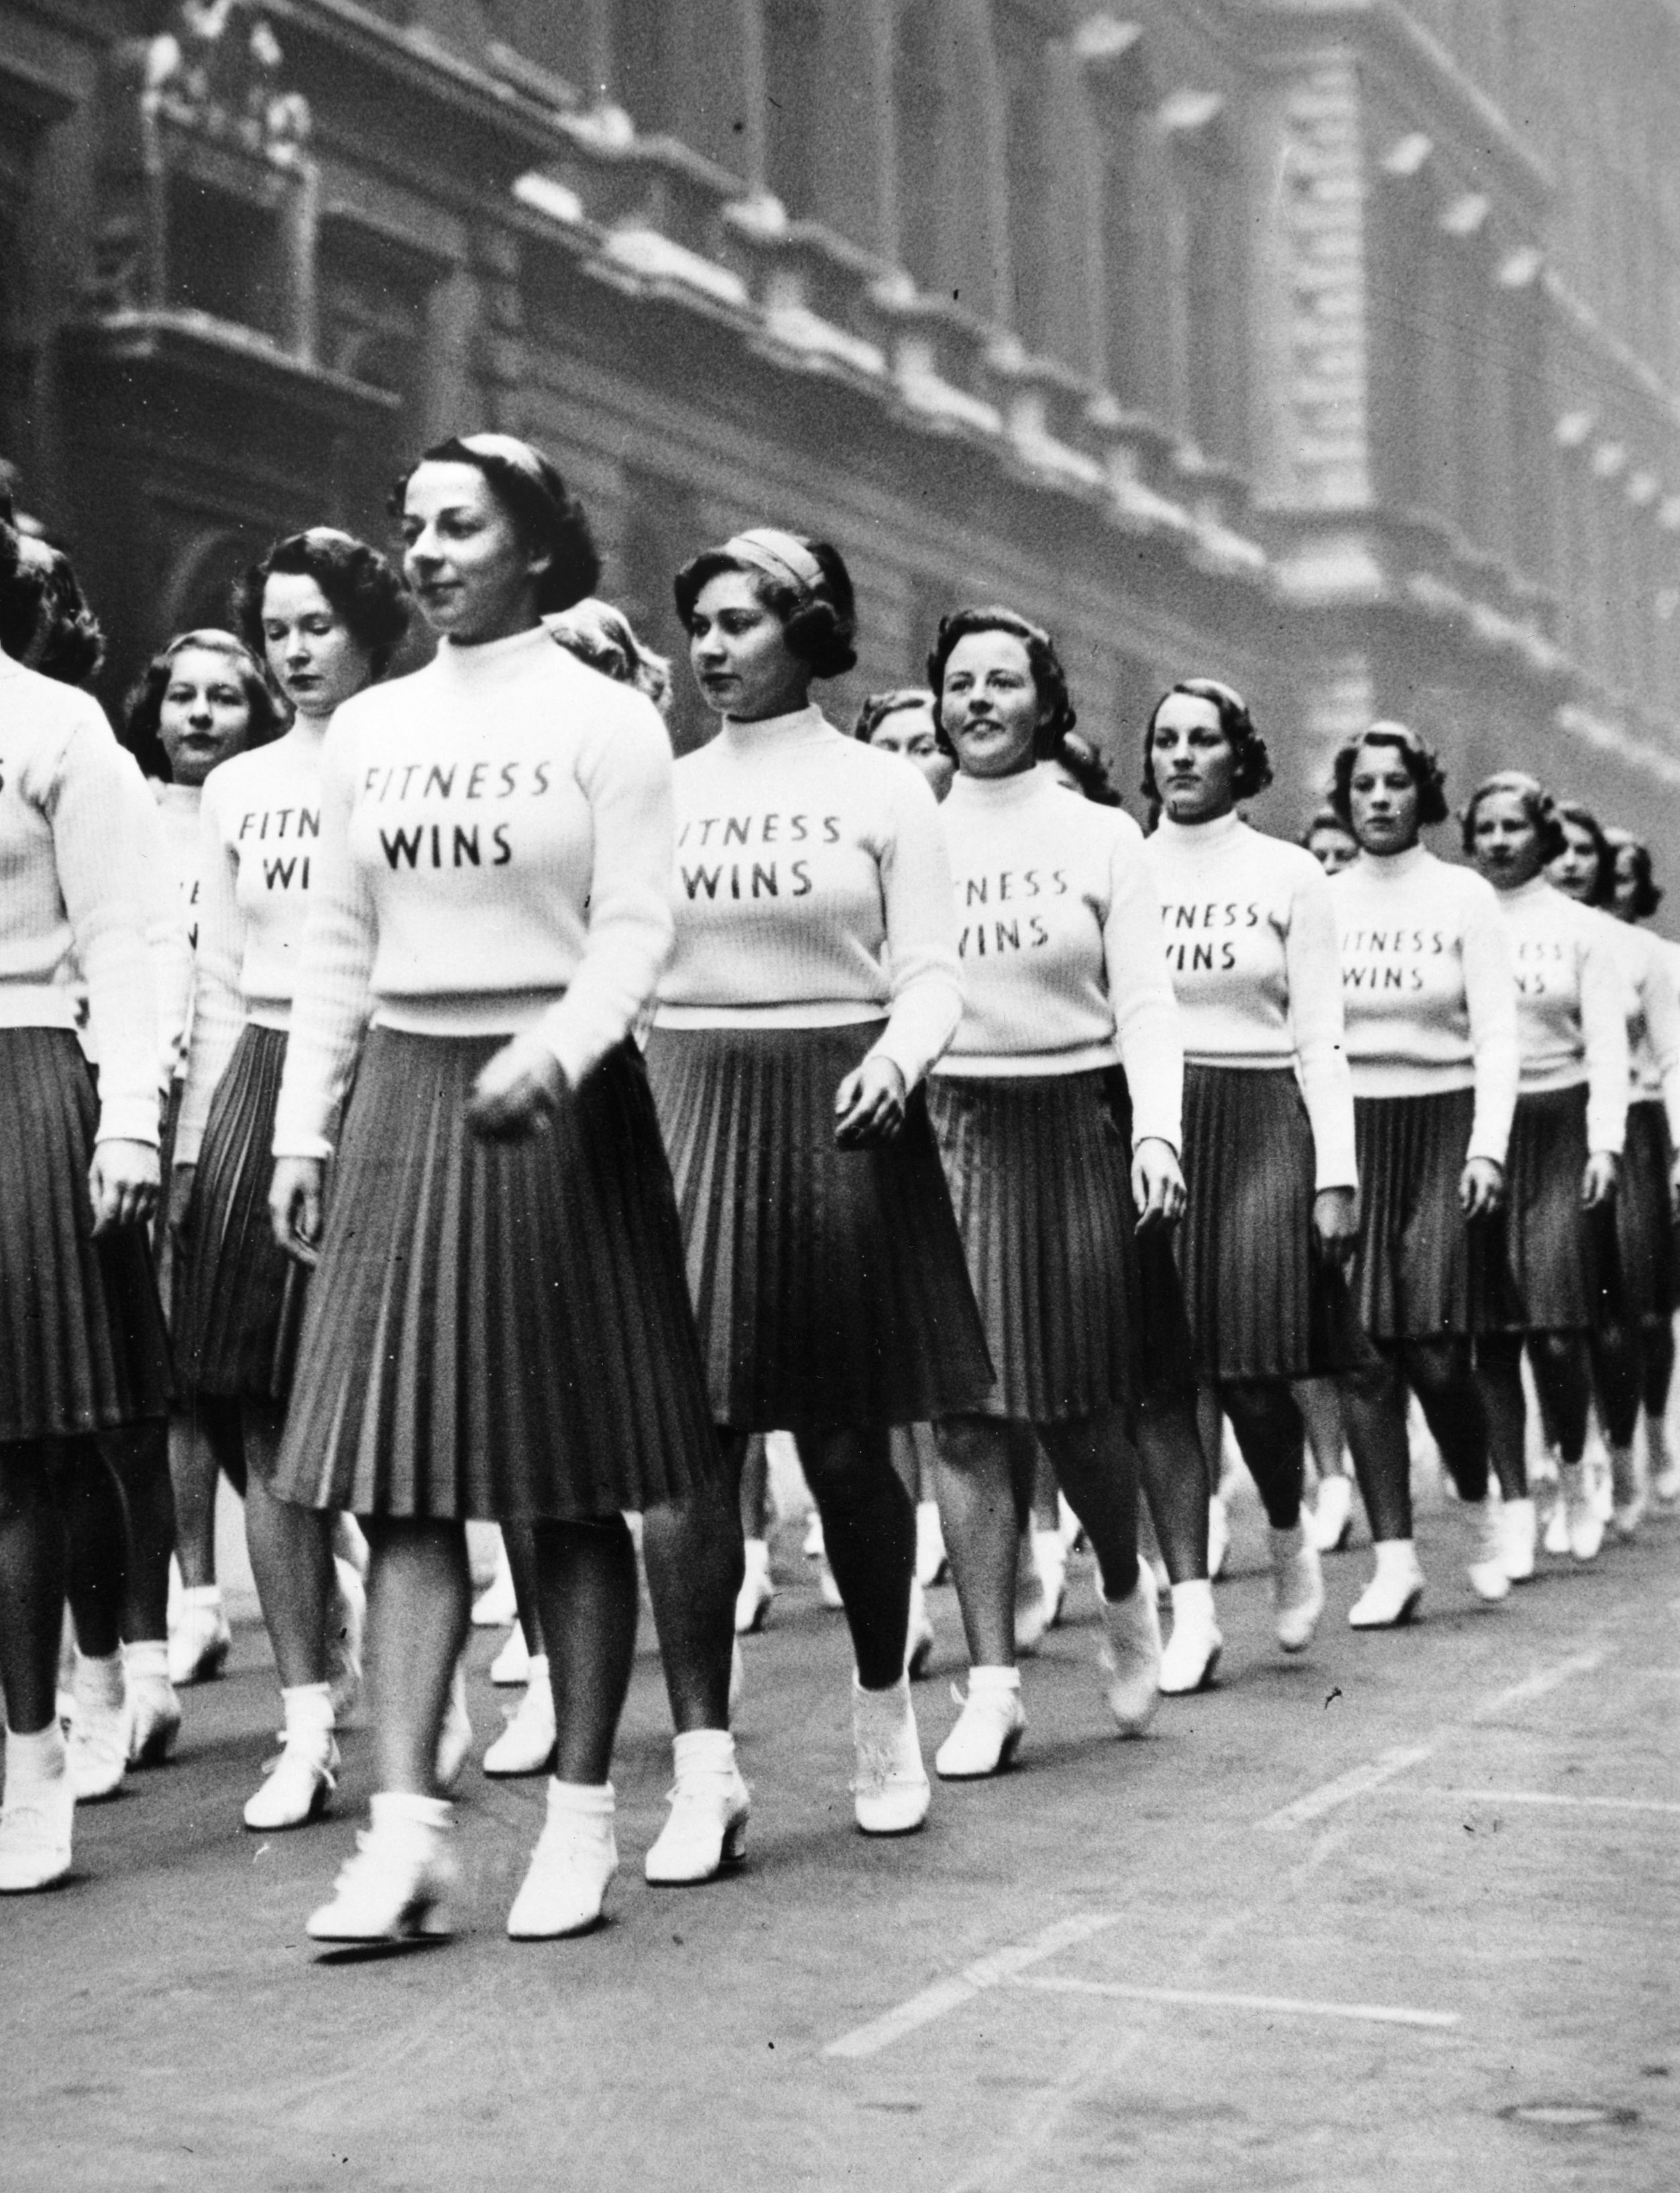 Take a Look at the Fascinating History of Women's Exercise